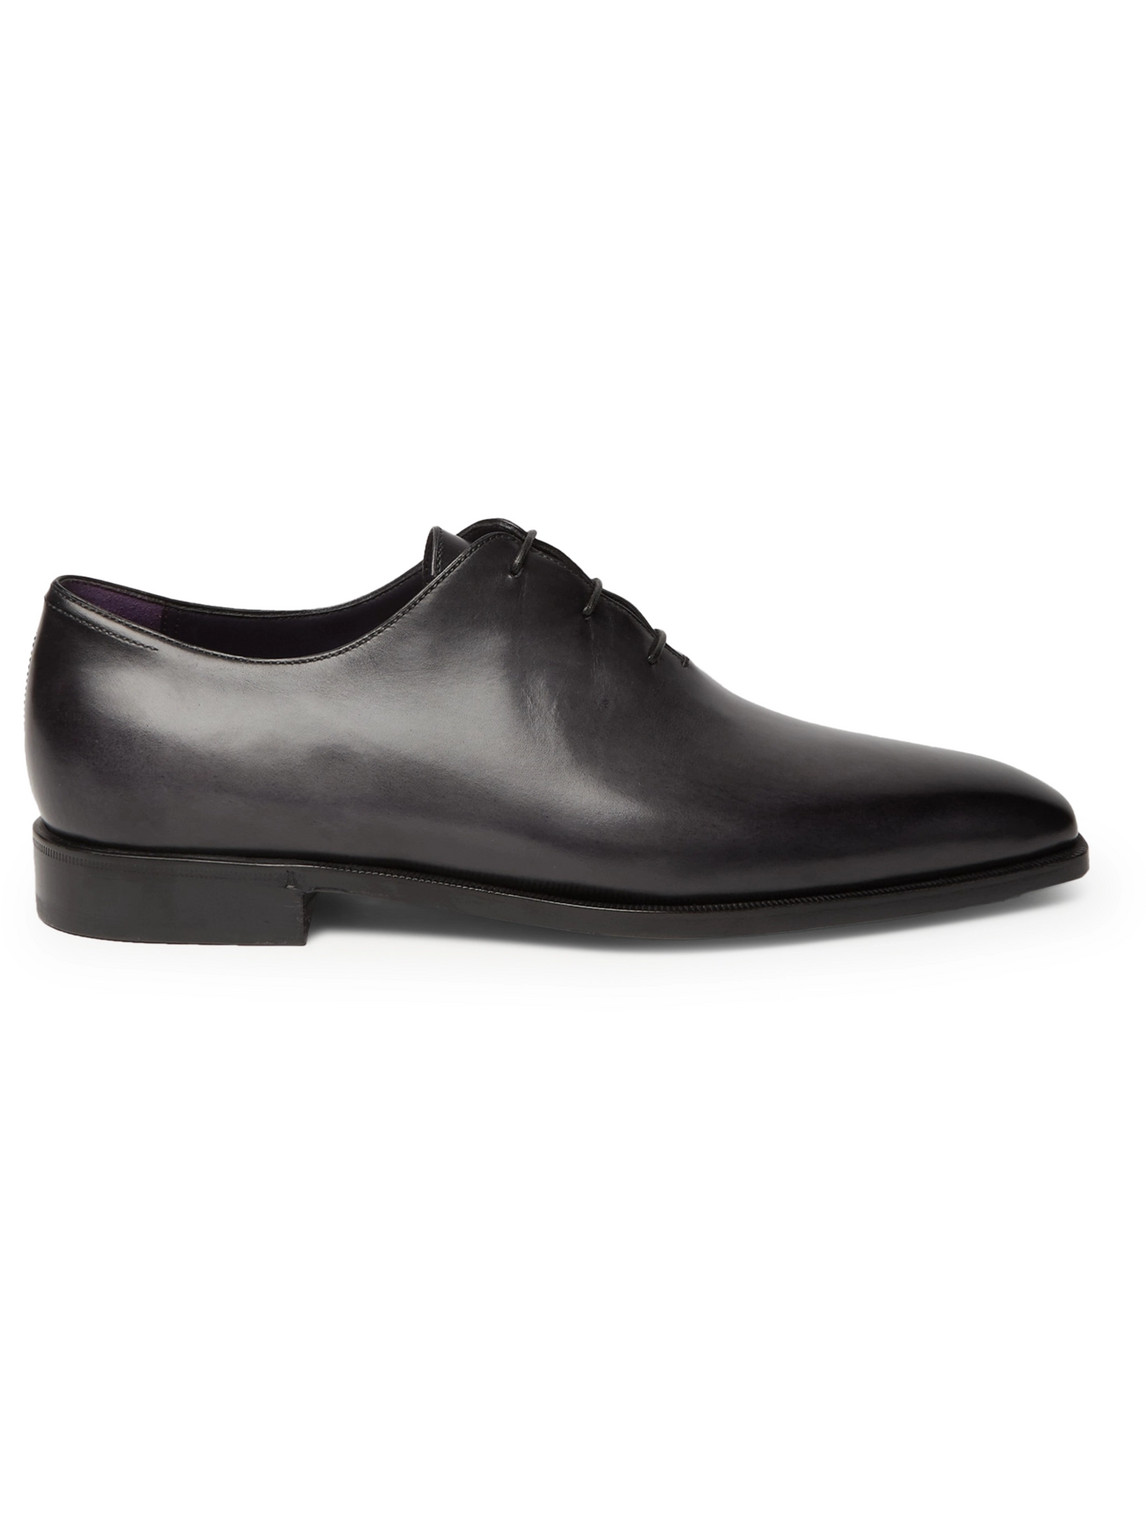 Berluti Leather Oxford Shoes In Black